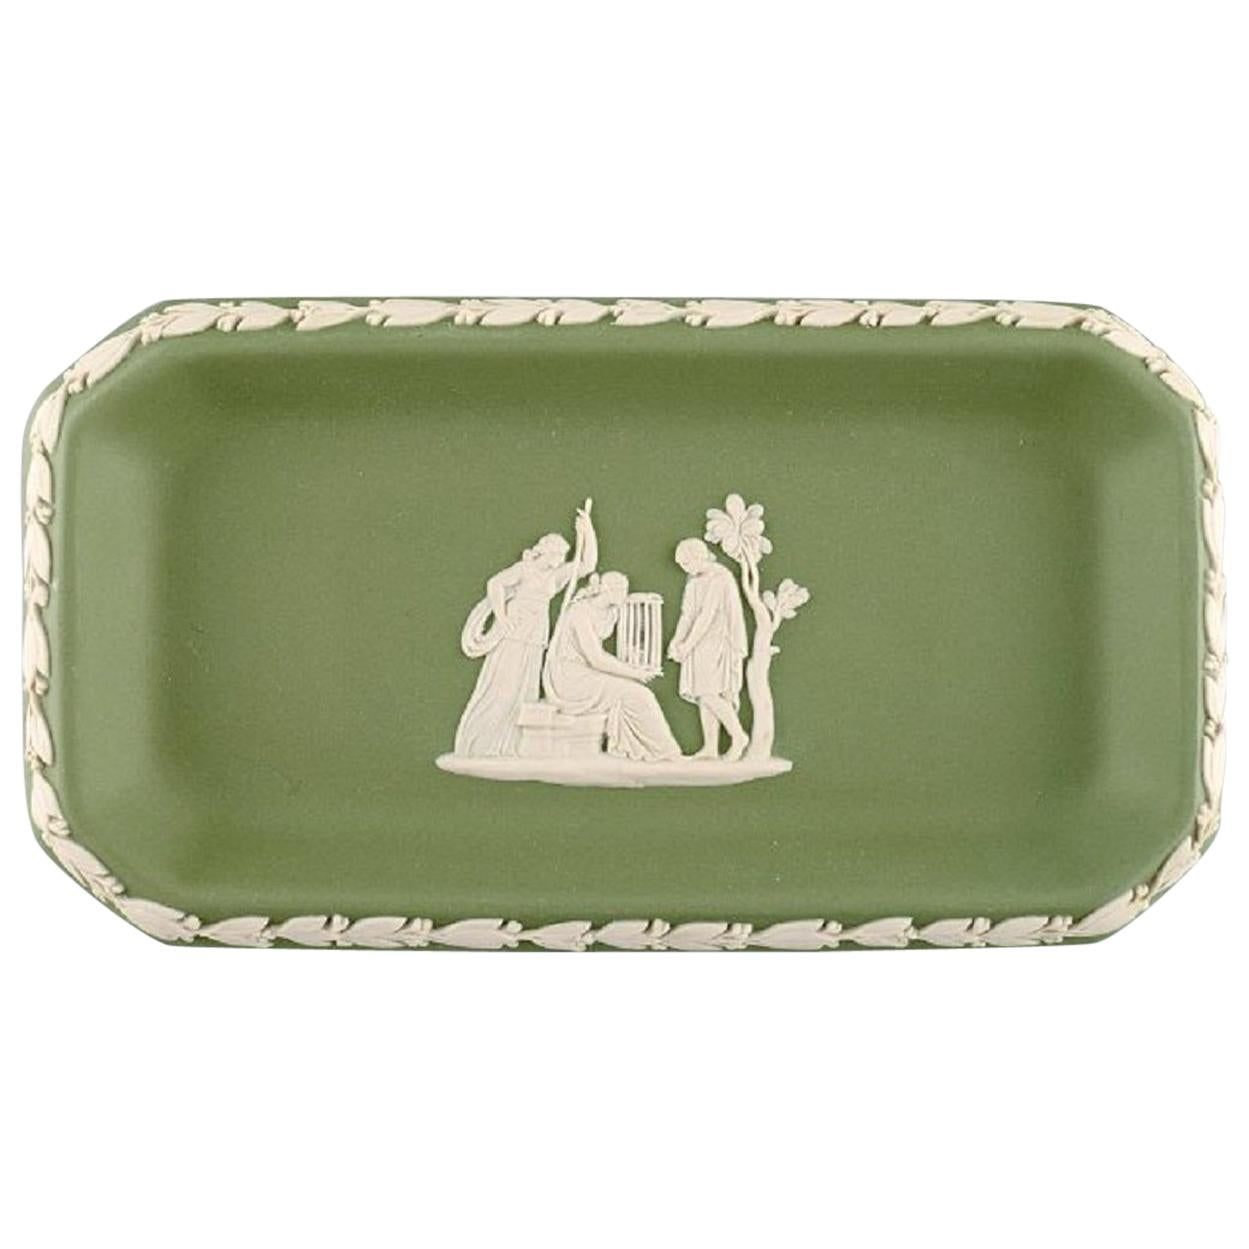 Wedgwood, England, Small Dish in Green Stoneware with Classicist Scenes